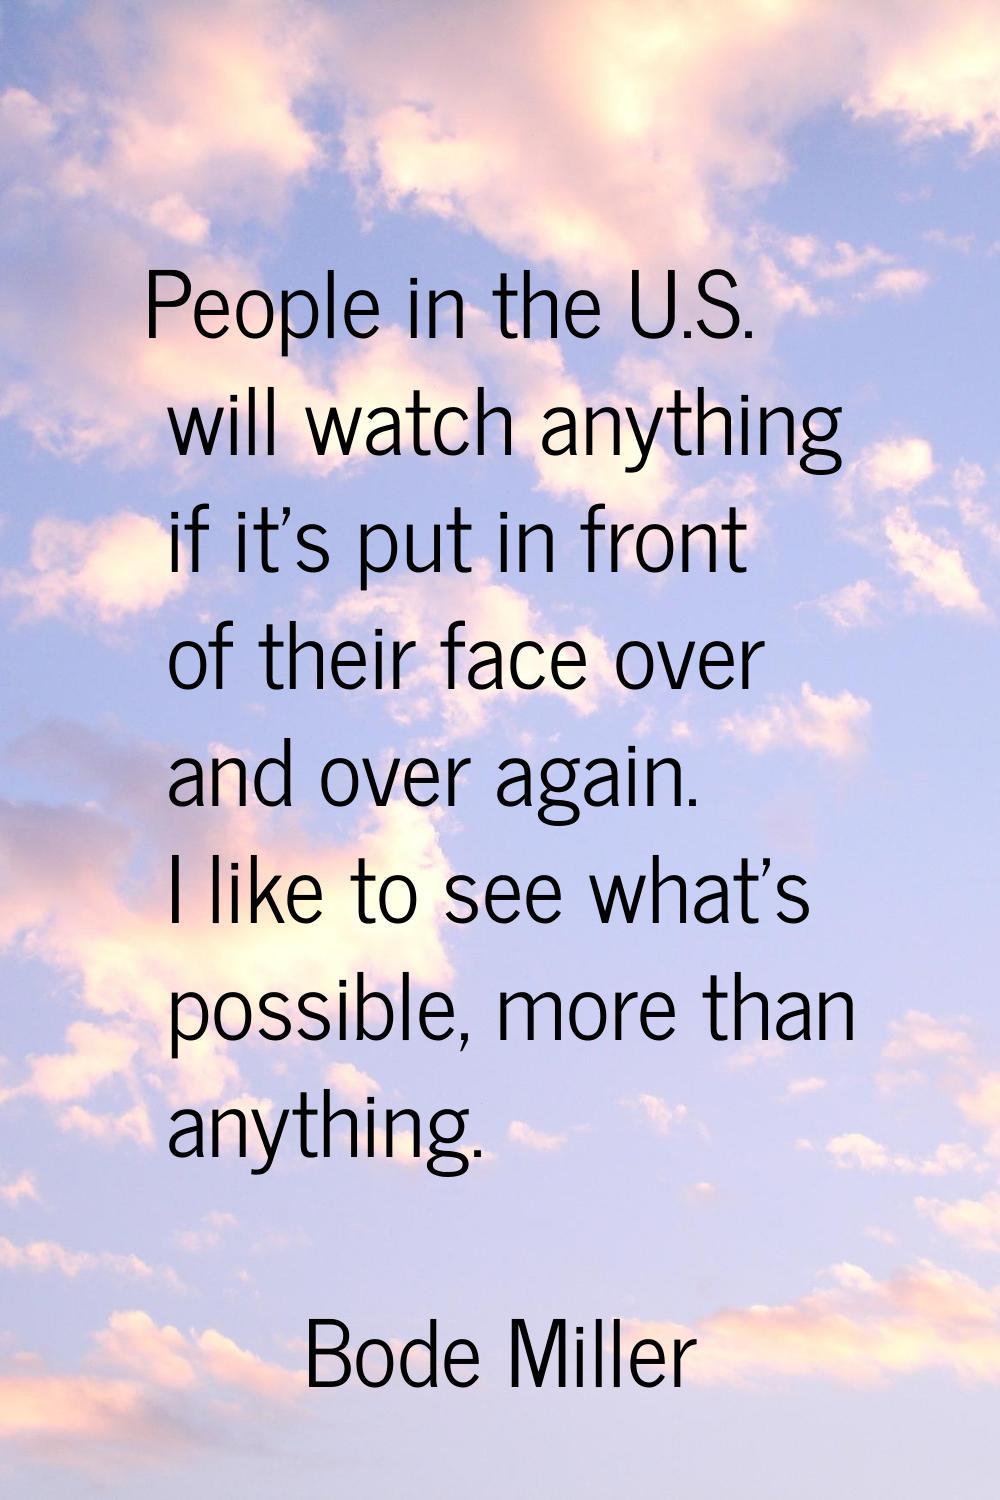 People in the U.S. will watch anything if it's put in front of their face over and over again. I li